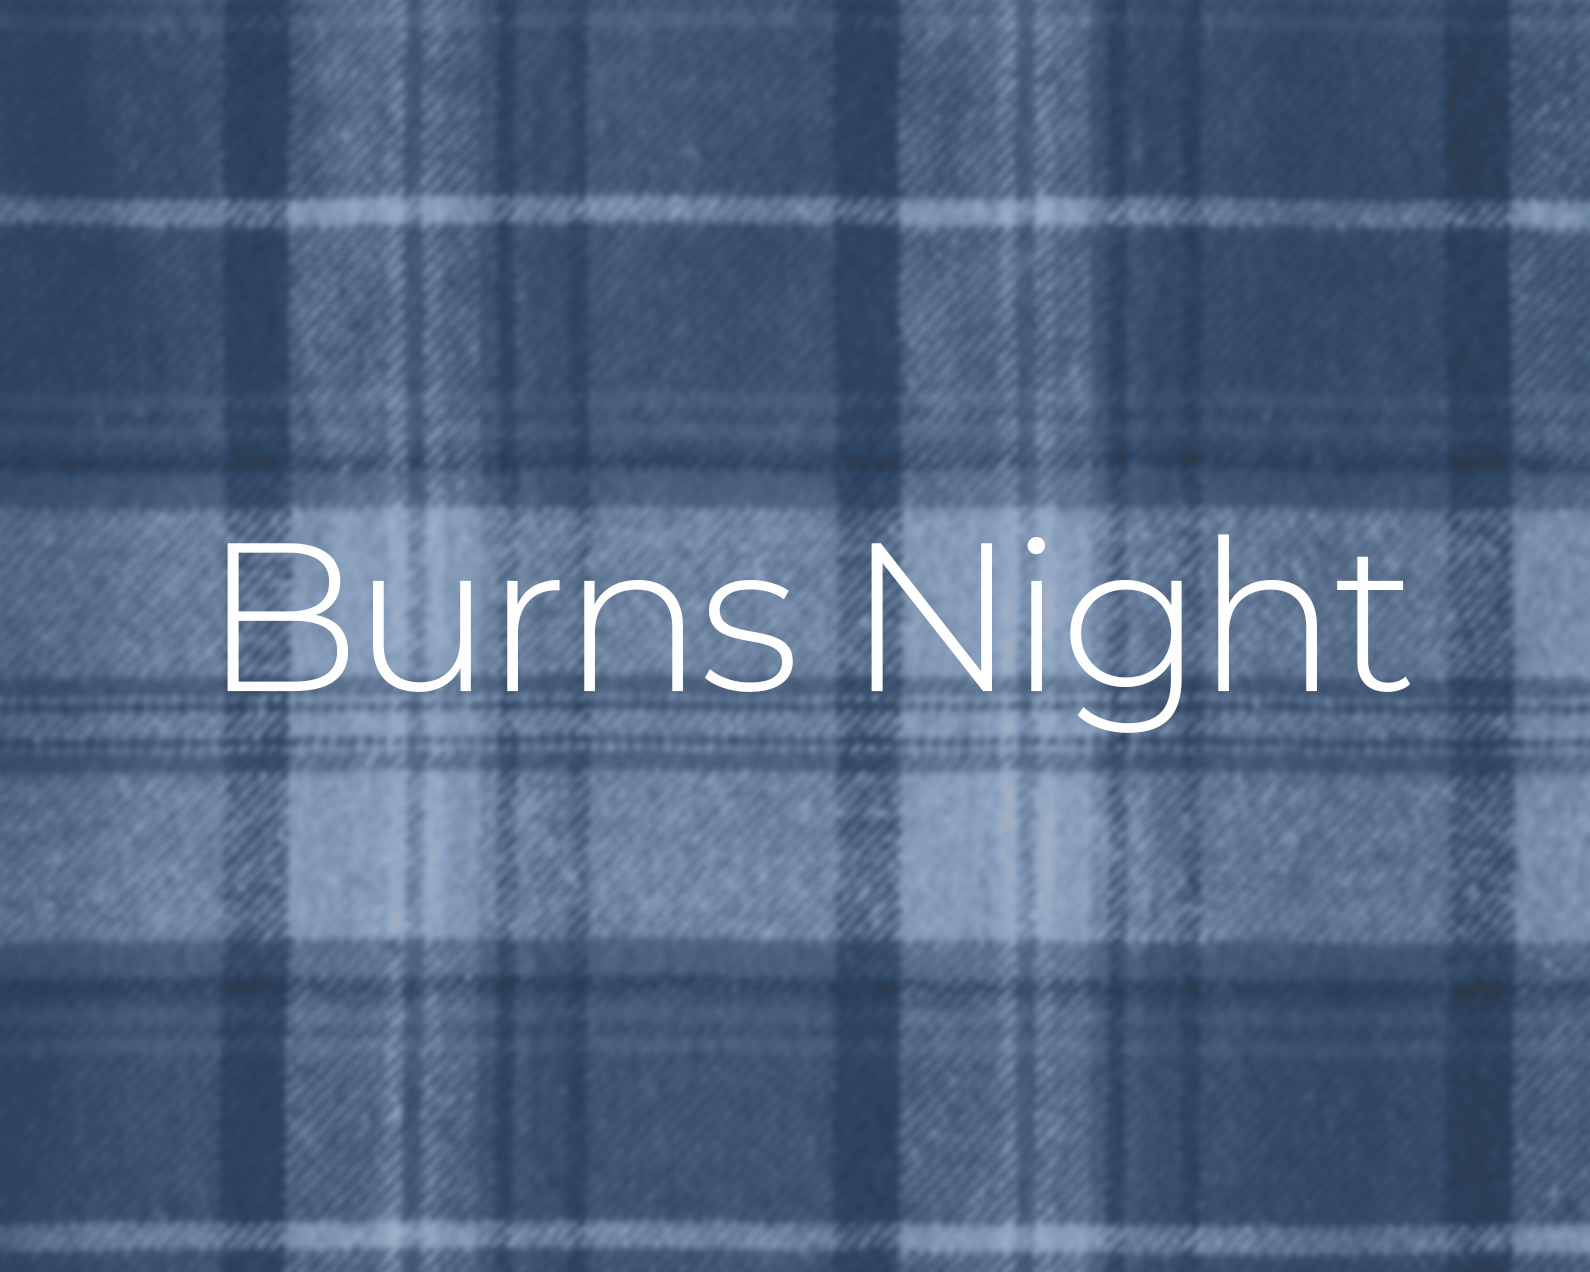 An image of blue tartan. There is overlayed text which reads: Burns Night.